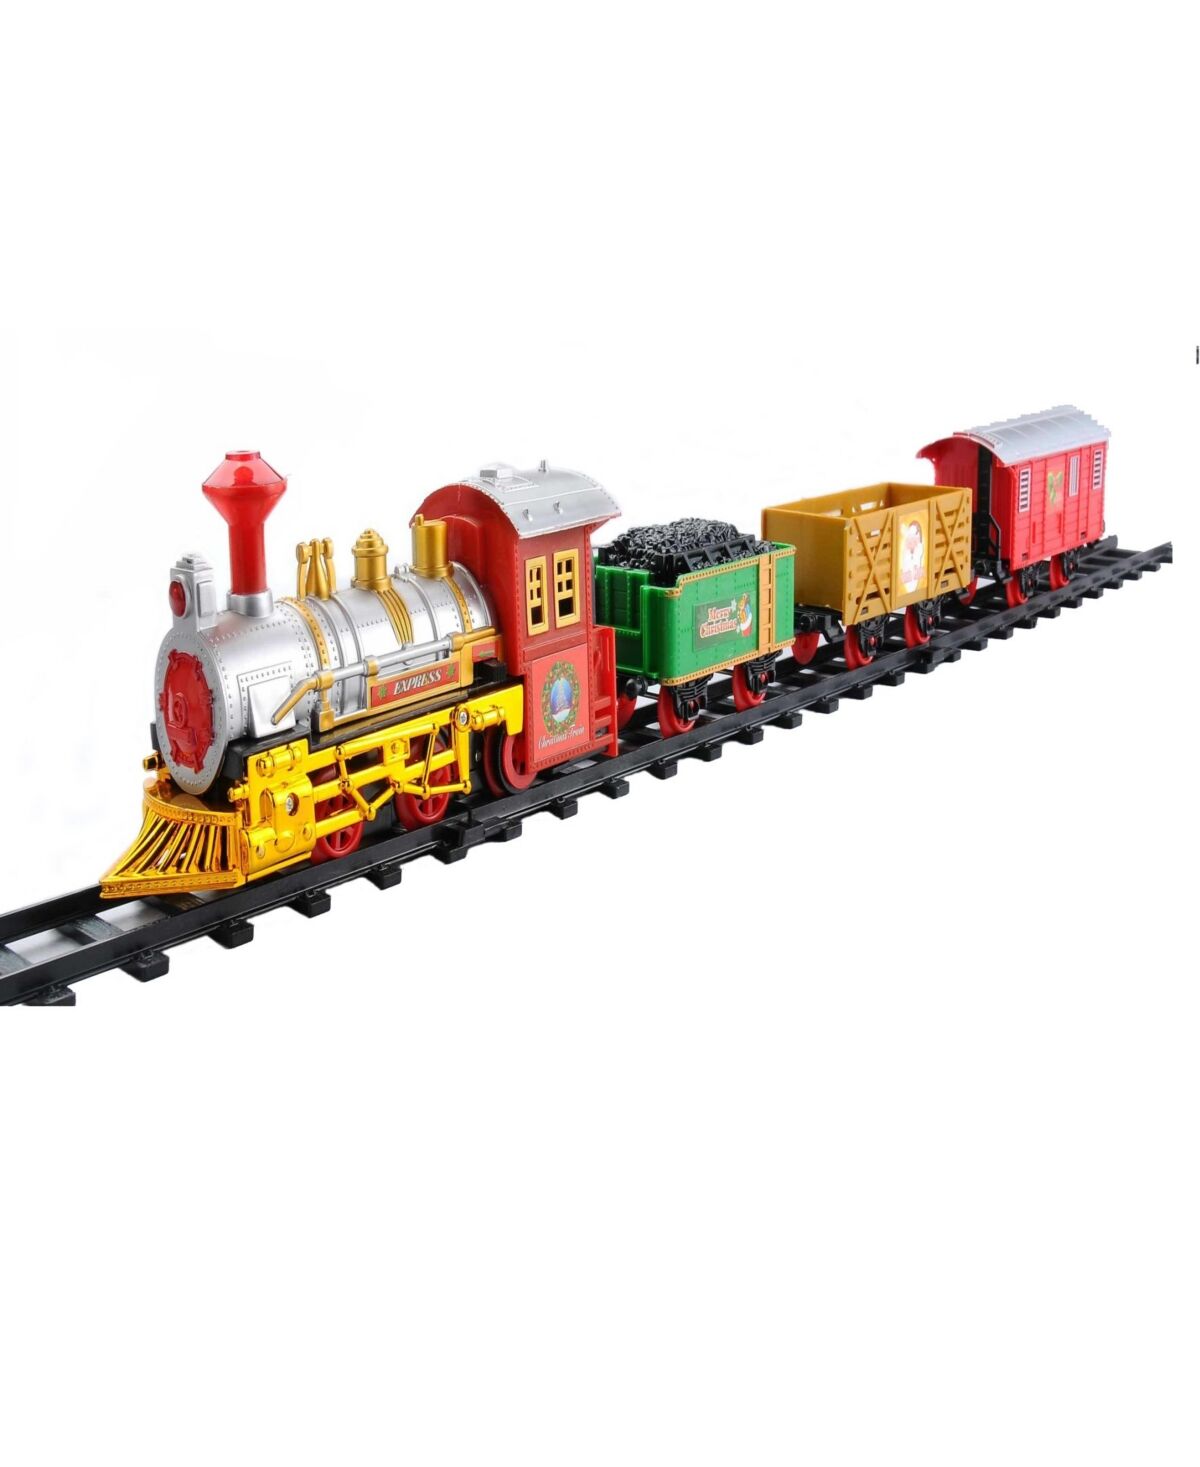 Northlight Battery Operated Lighted and Animated Christmas Express Train Set with Sound - Red